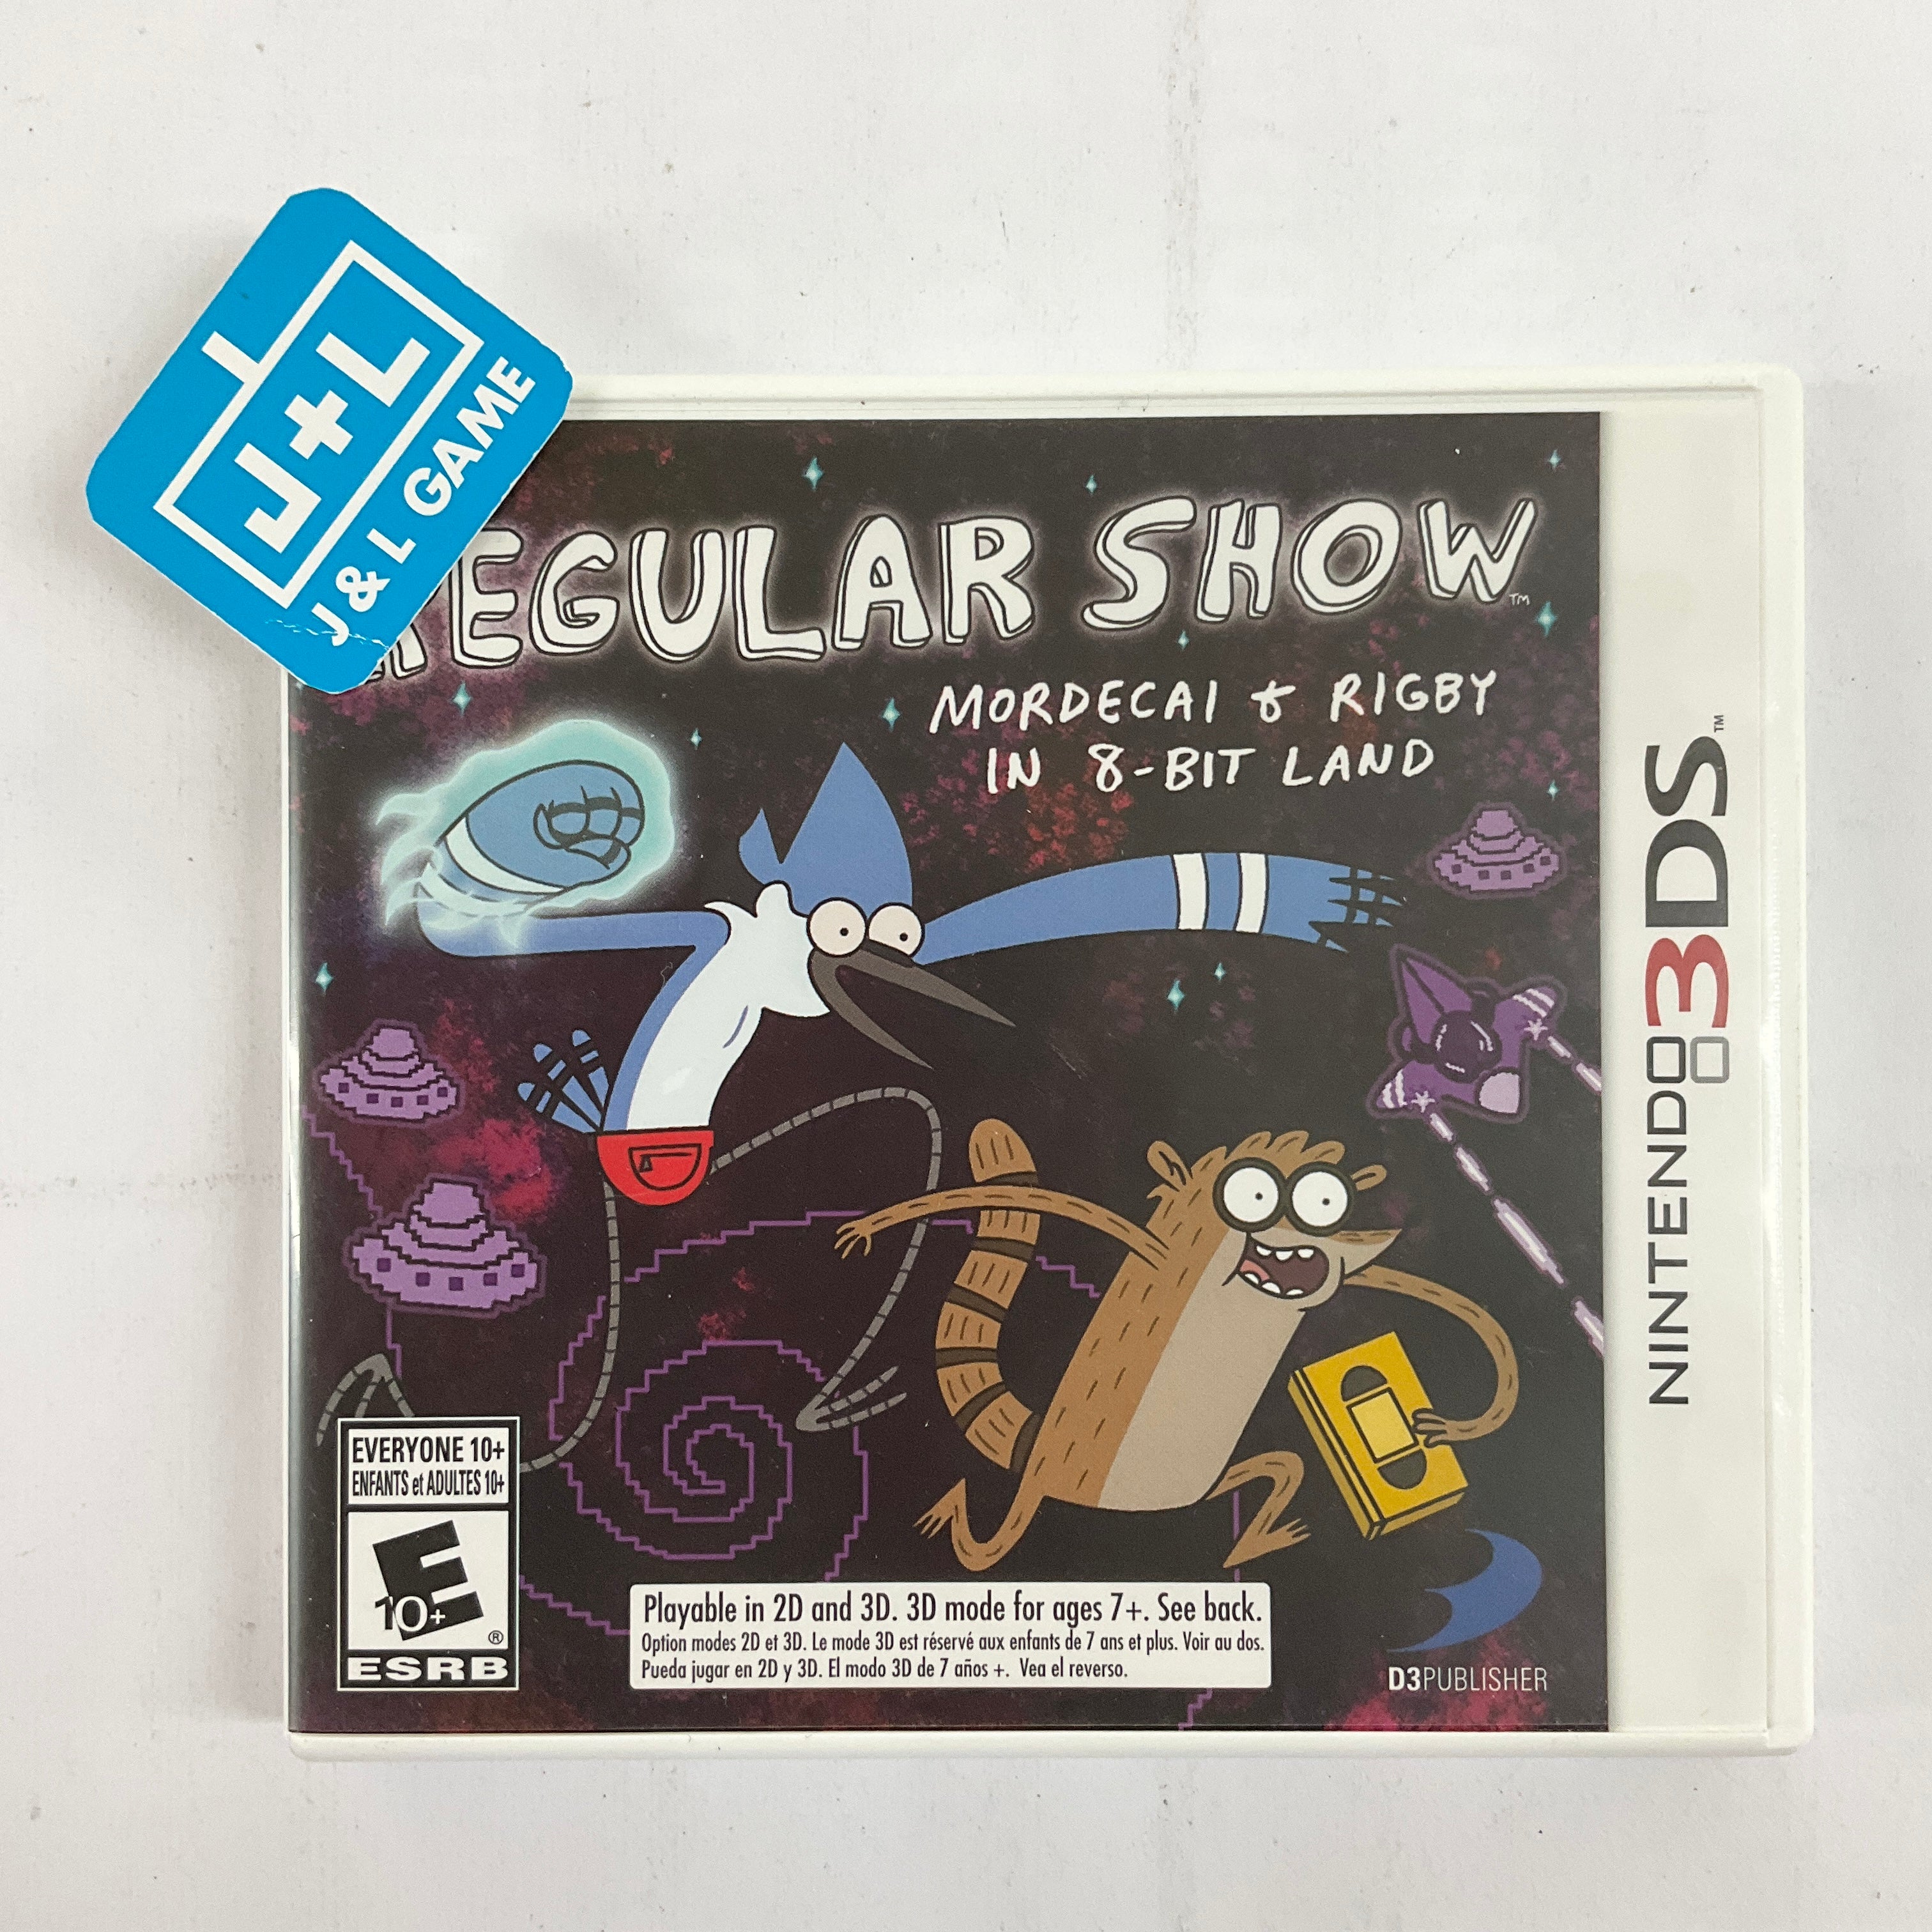 Regular Show: Mordecai and Rigby in 8-Bit Land - Nintendo 3DS [Pre-Owned] Video Games D3Publisher   